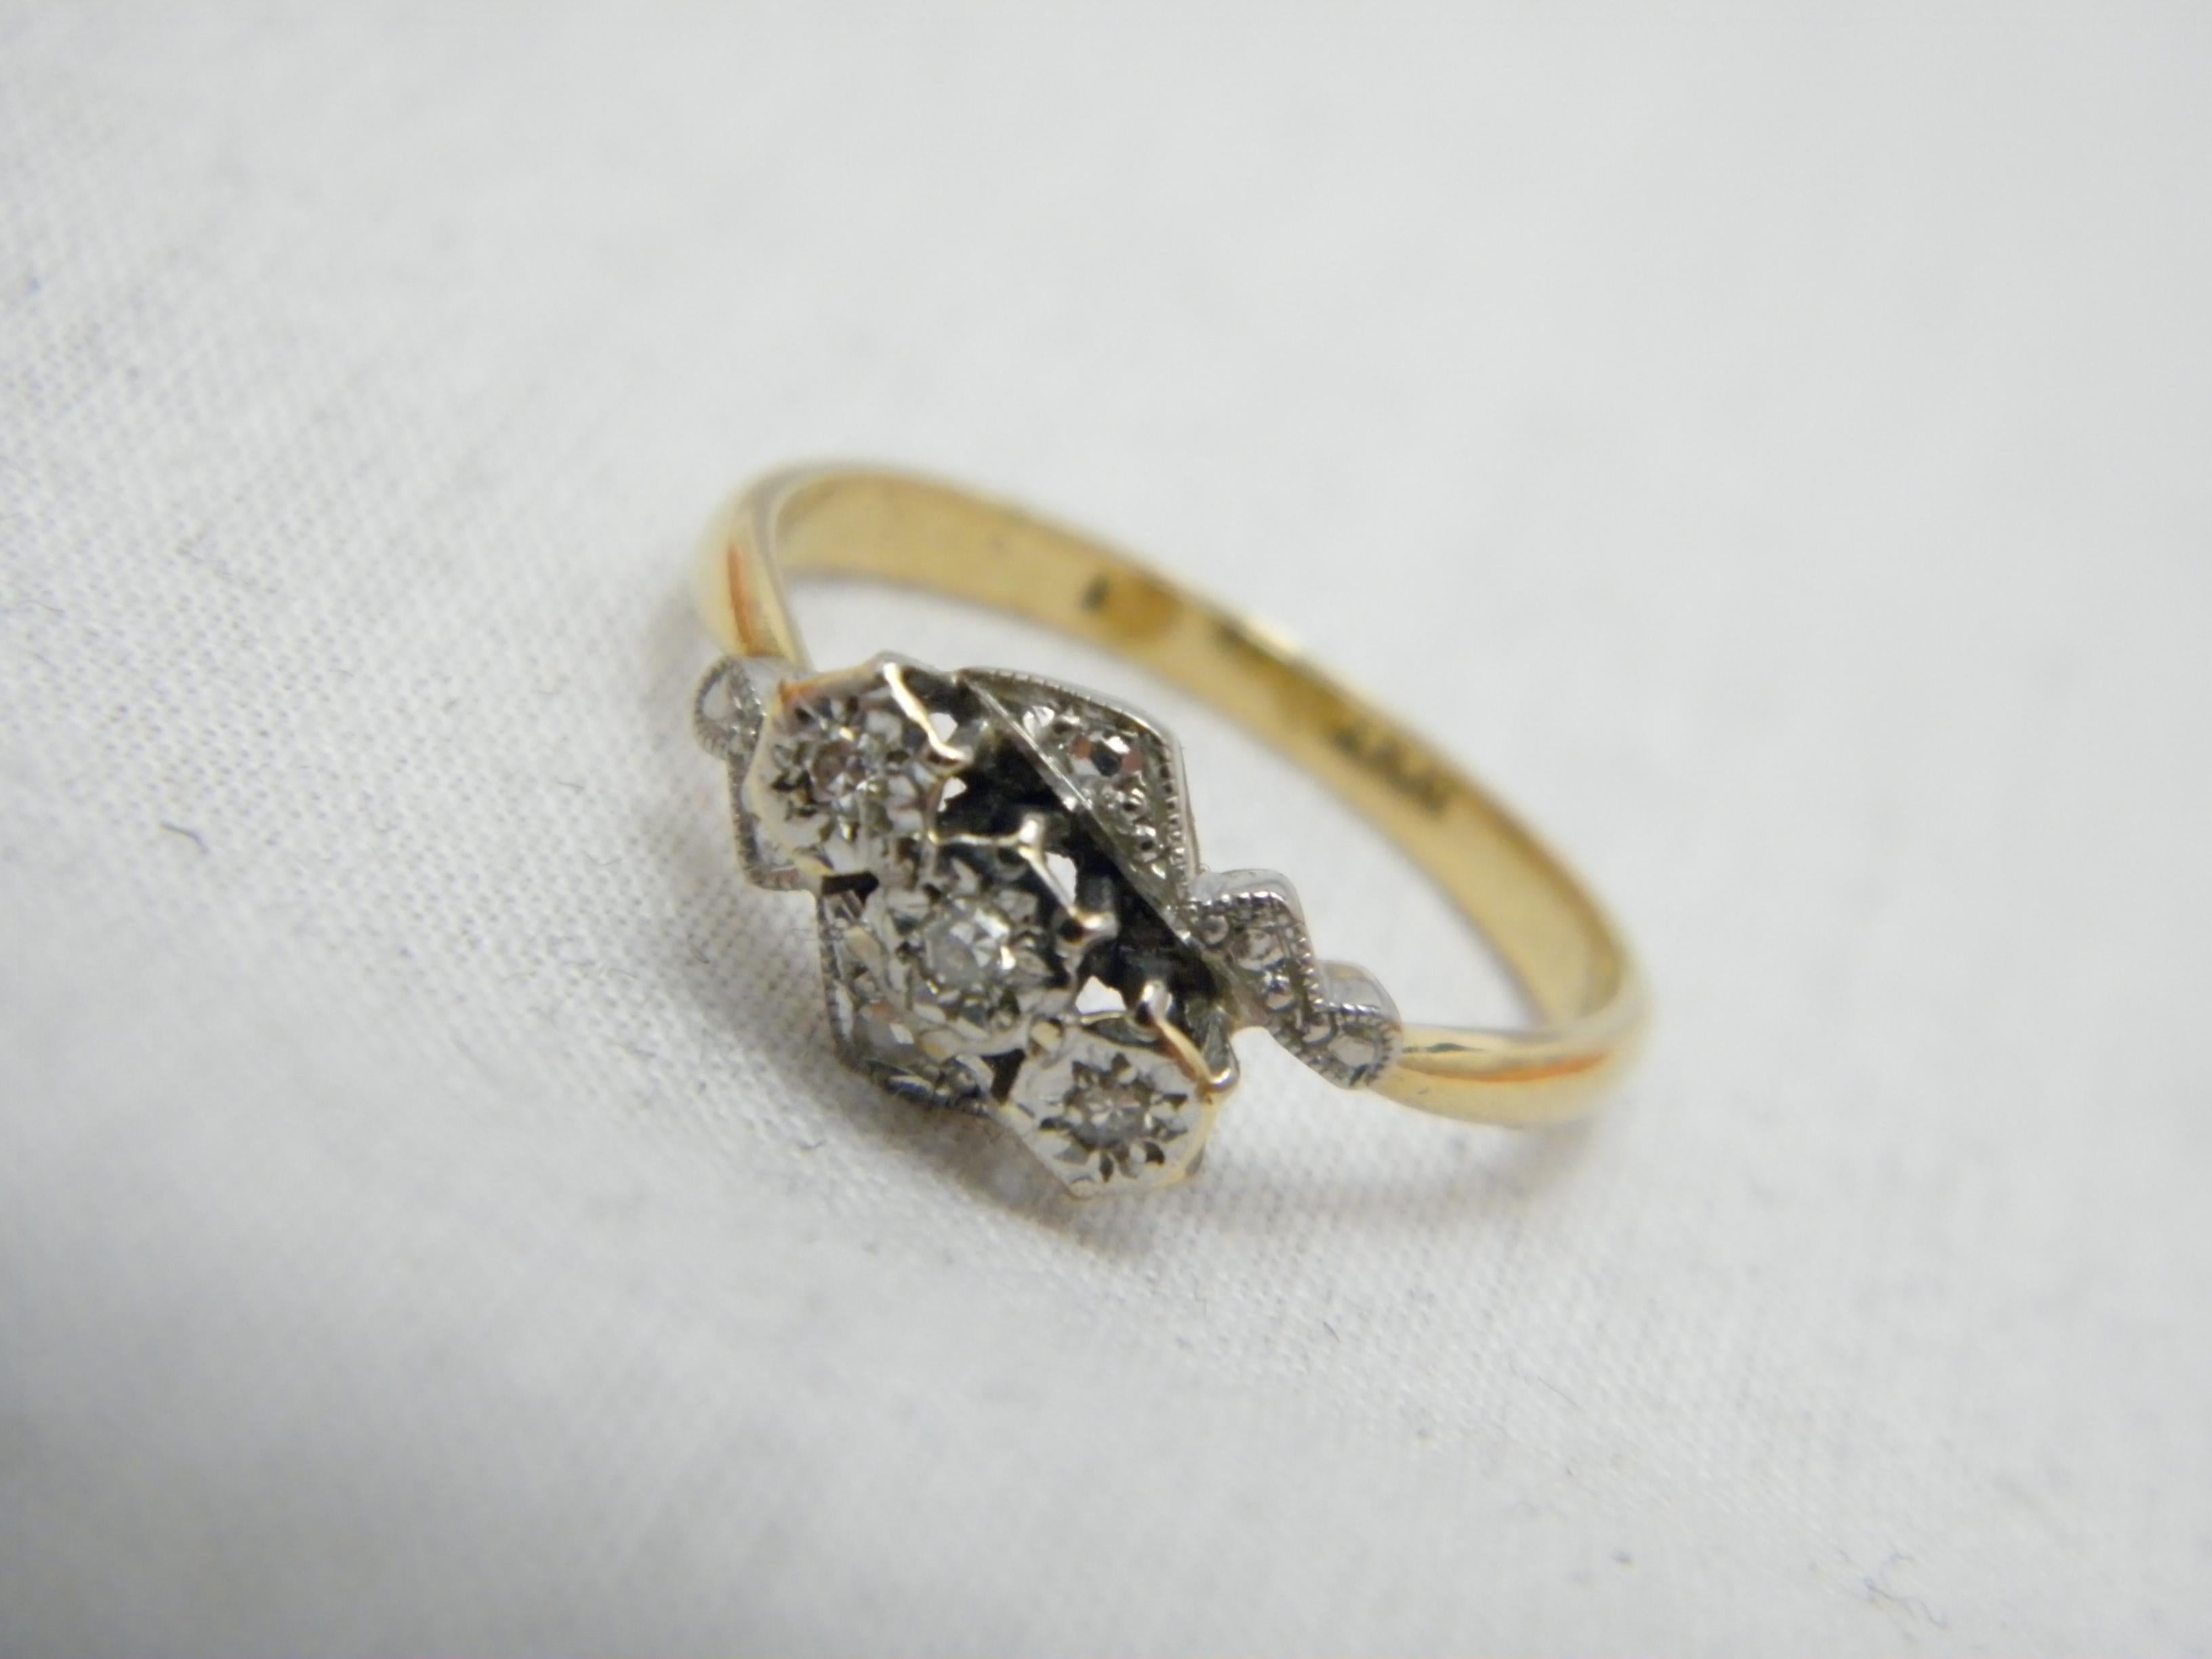 If you have landed on this page then you have an eye for beauty.

On offer is this gorgeous
18CT GOLD AND 950 PLATINUM DIAMOND BYPASS TRILOGY ENGAGEMENT RING

DETAILS
Material: 18ct 750/000 Yellow Gold with 950/1000 Platinum Pt Mount
This ring has a